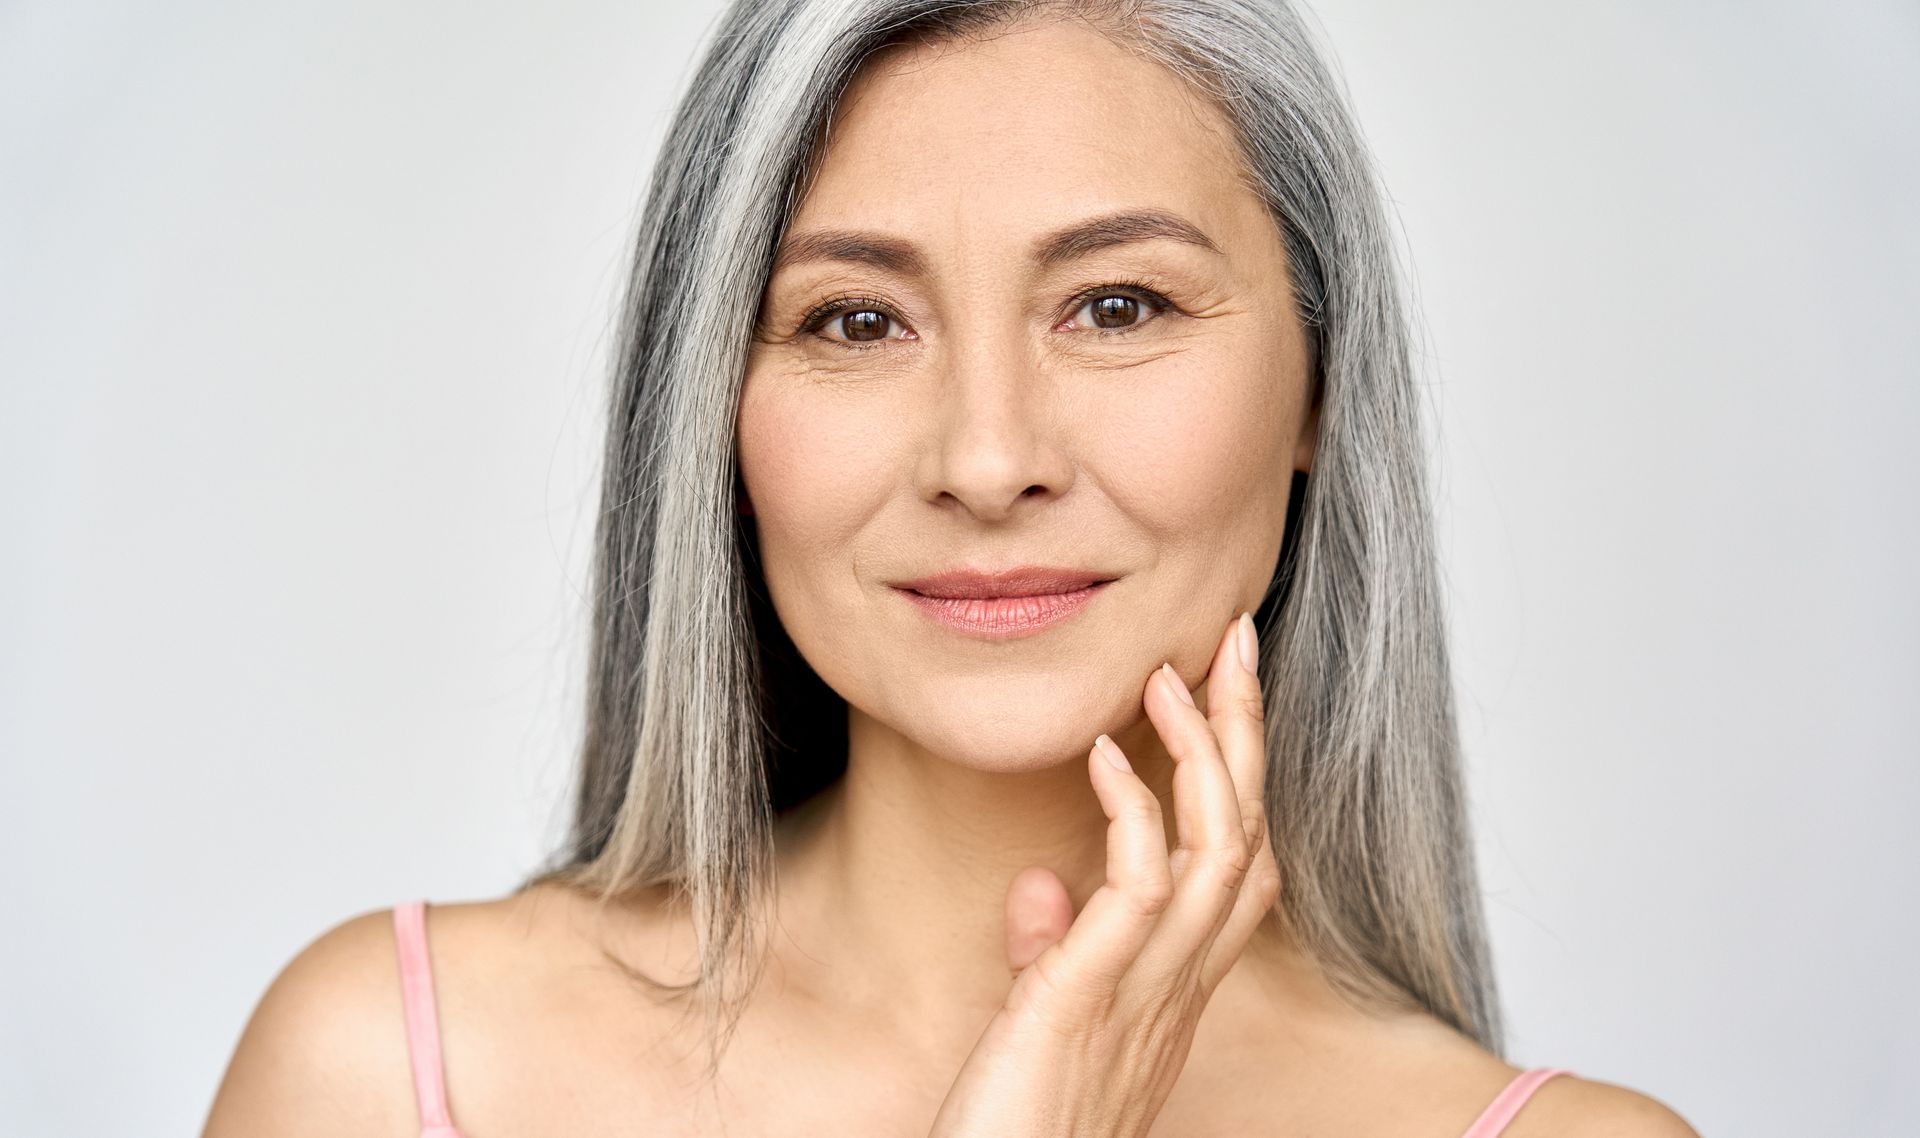 a woman with gray hair is touching her face and smiling .